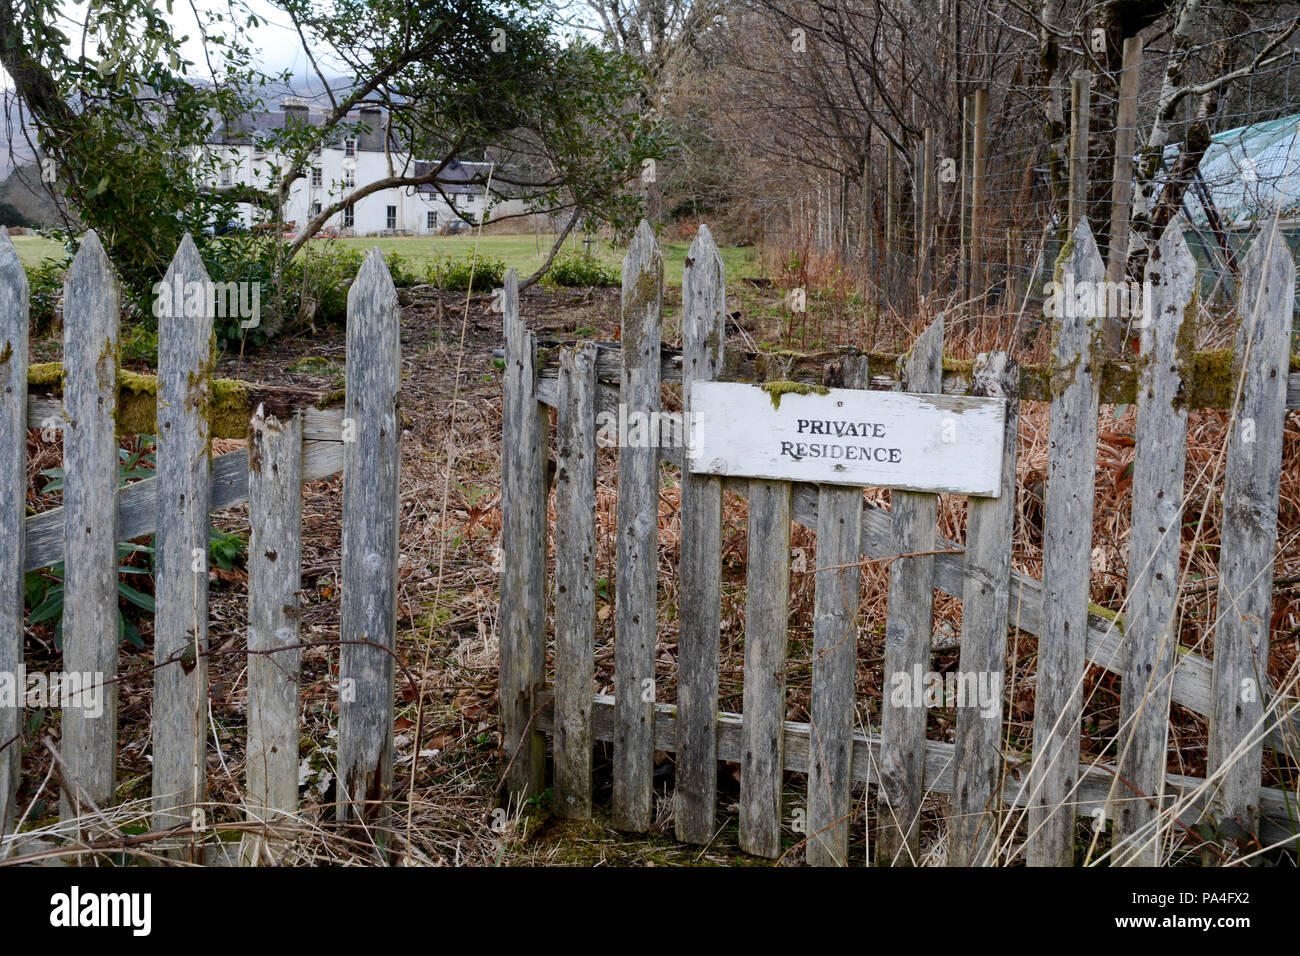 A sign on a broken wood picket fence reading 'Private Residence' in the town of Inverie, Knoydart Peninsula, Northwest Highlands, Scotland, UK. Stock Photo